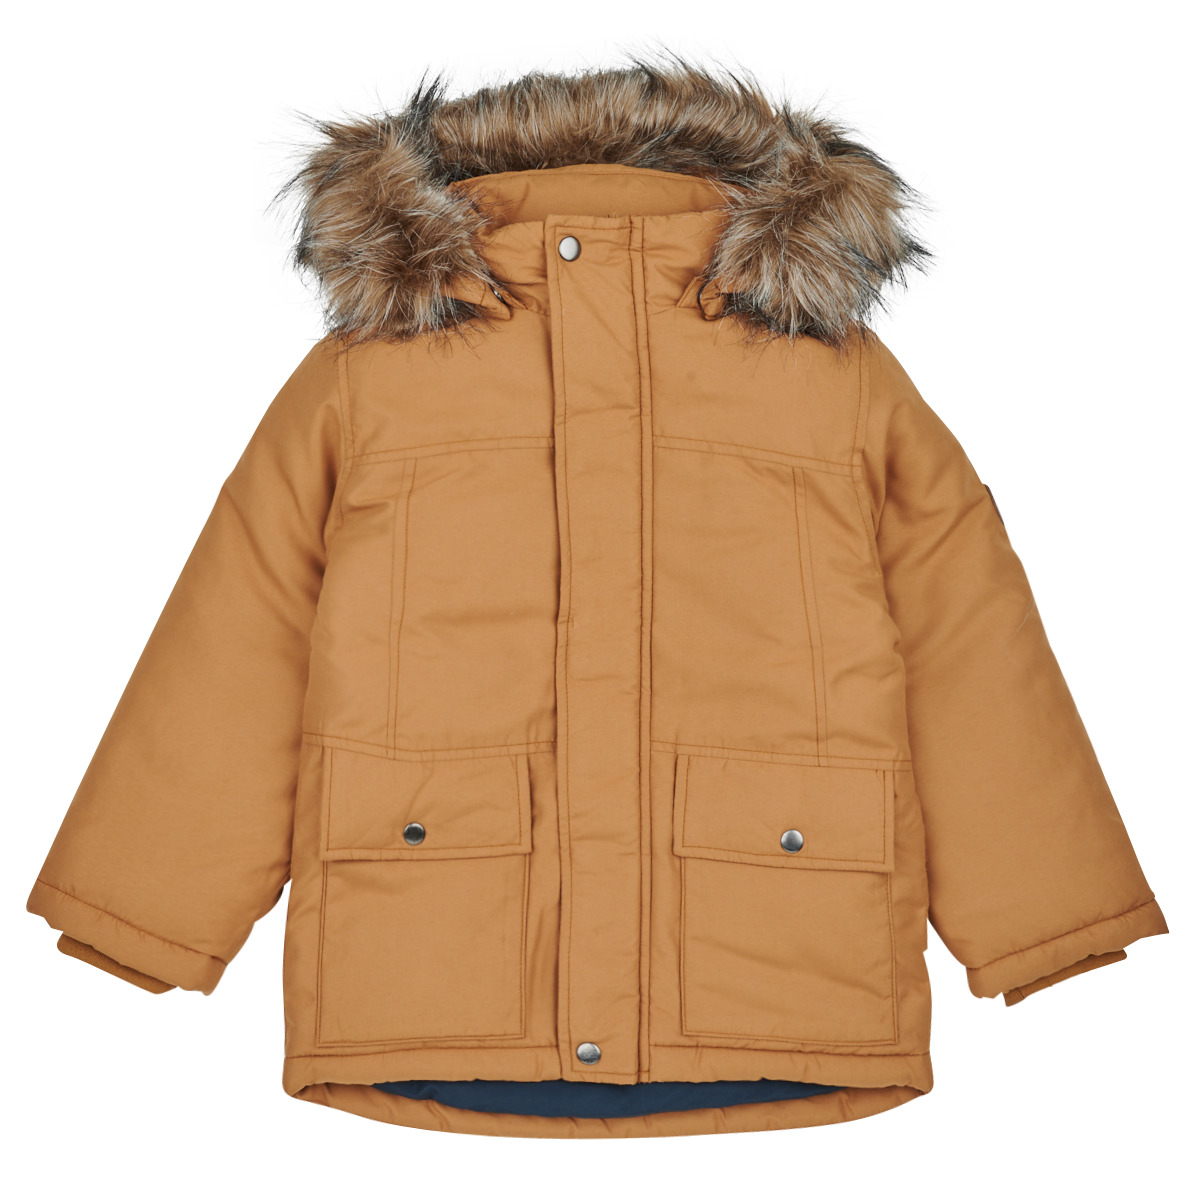 Spartoo Free | delivery Clothing ! NKMMARLIN - NET SOUTH Child Camel Parkas it JACKET PB Name PARKA -